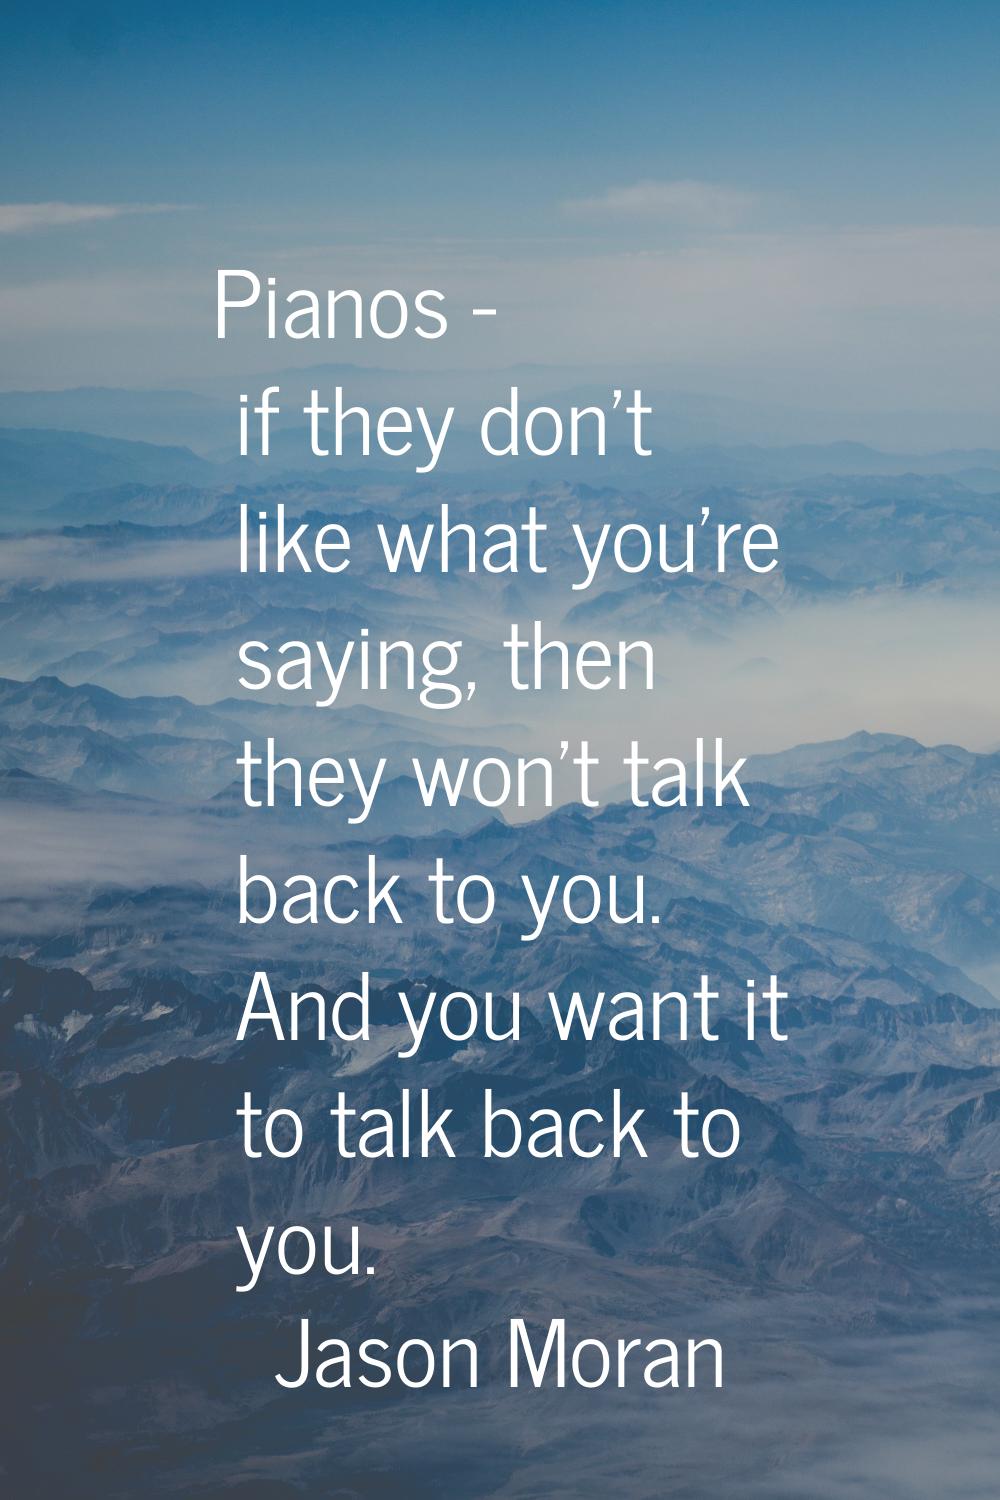 Pianos - if they don't like what you're saying, then they won't talk back to you. And you want it t